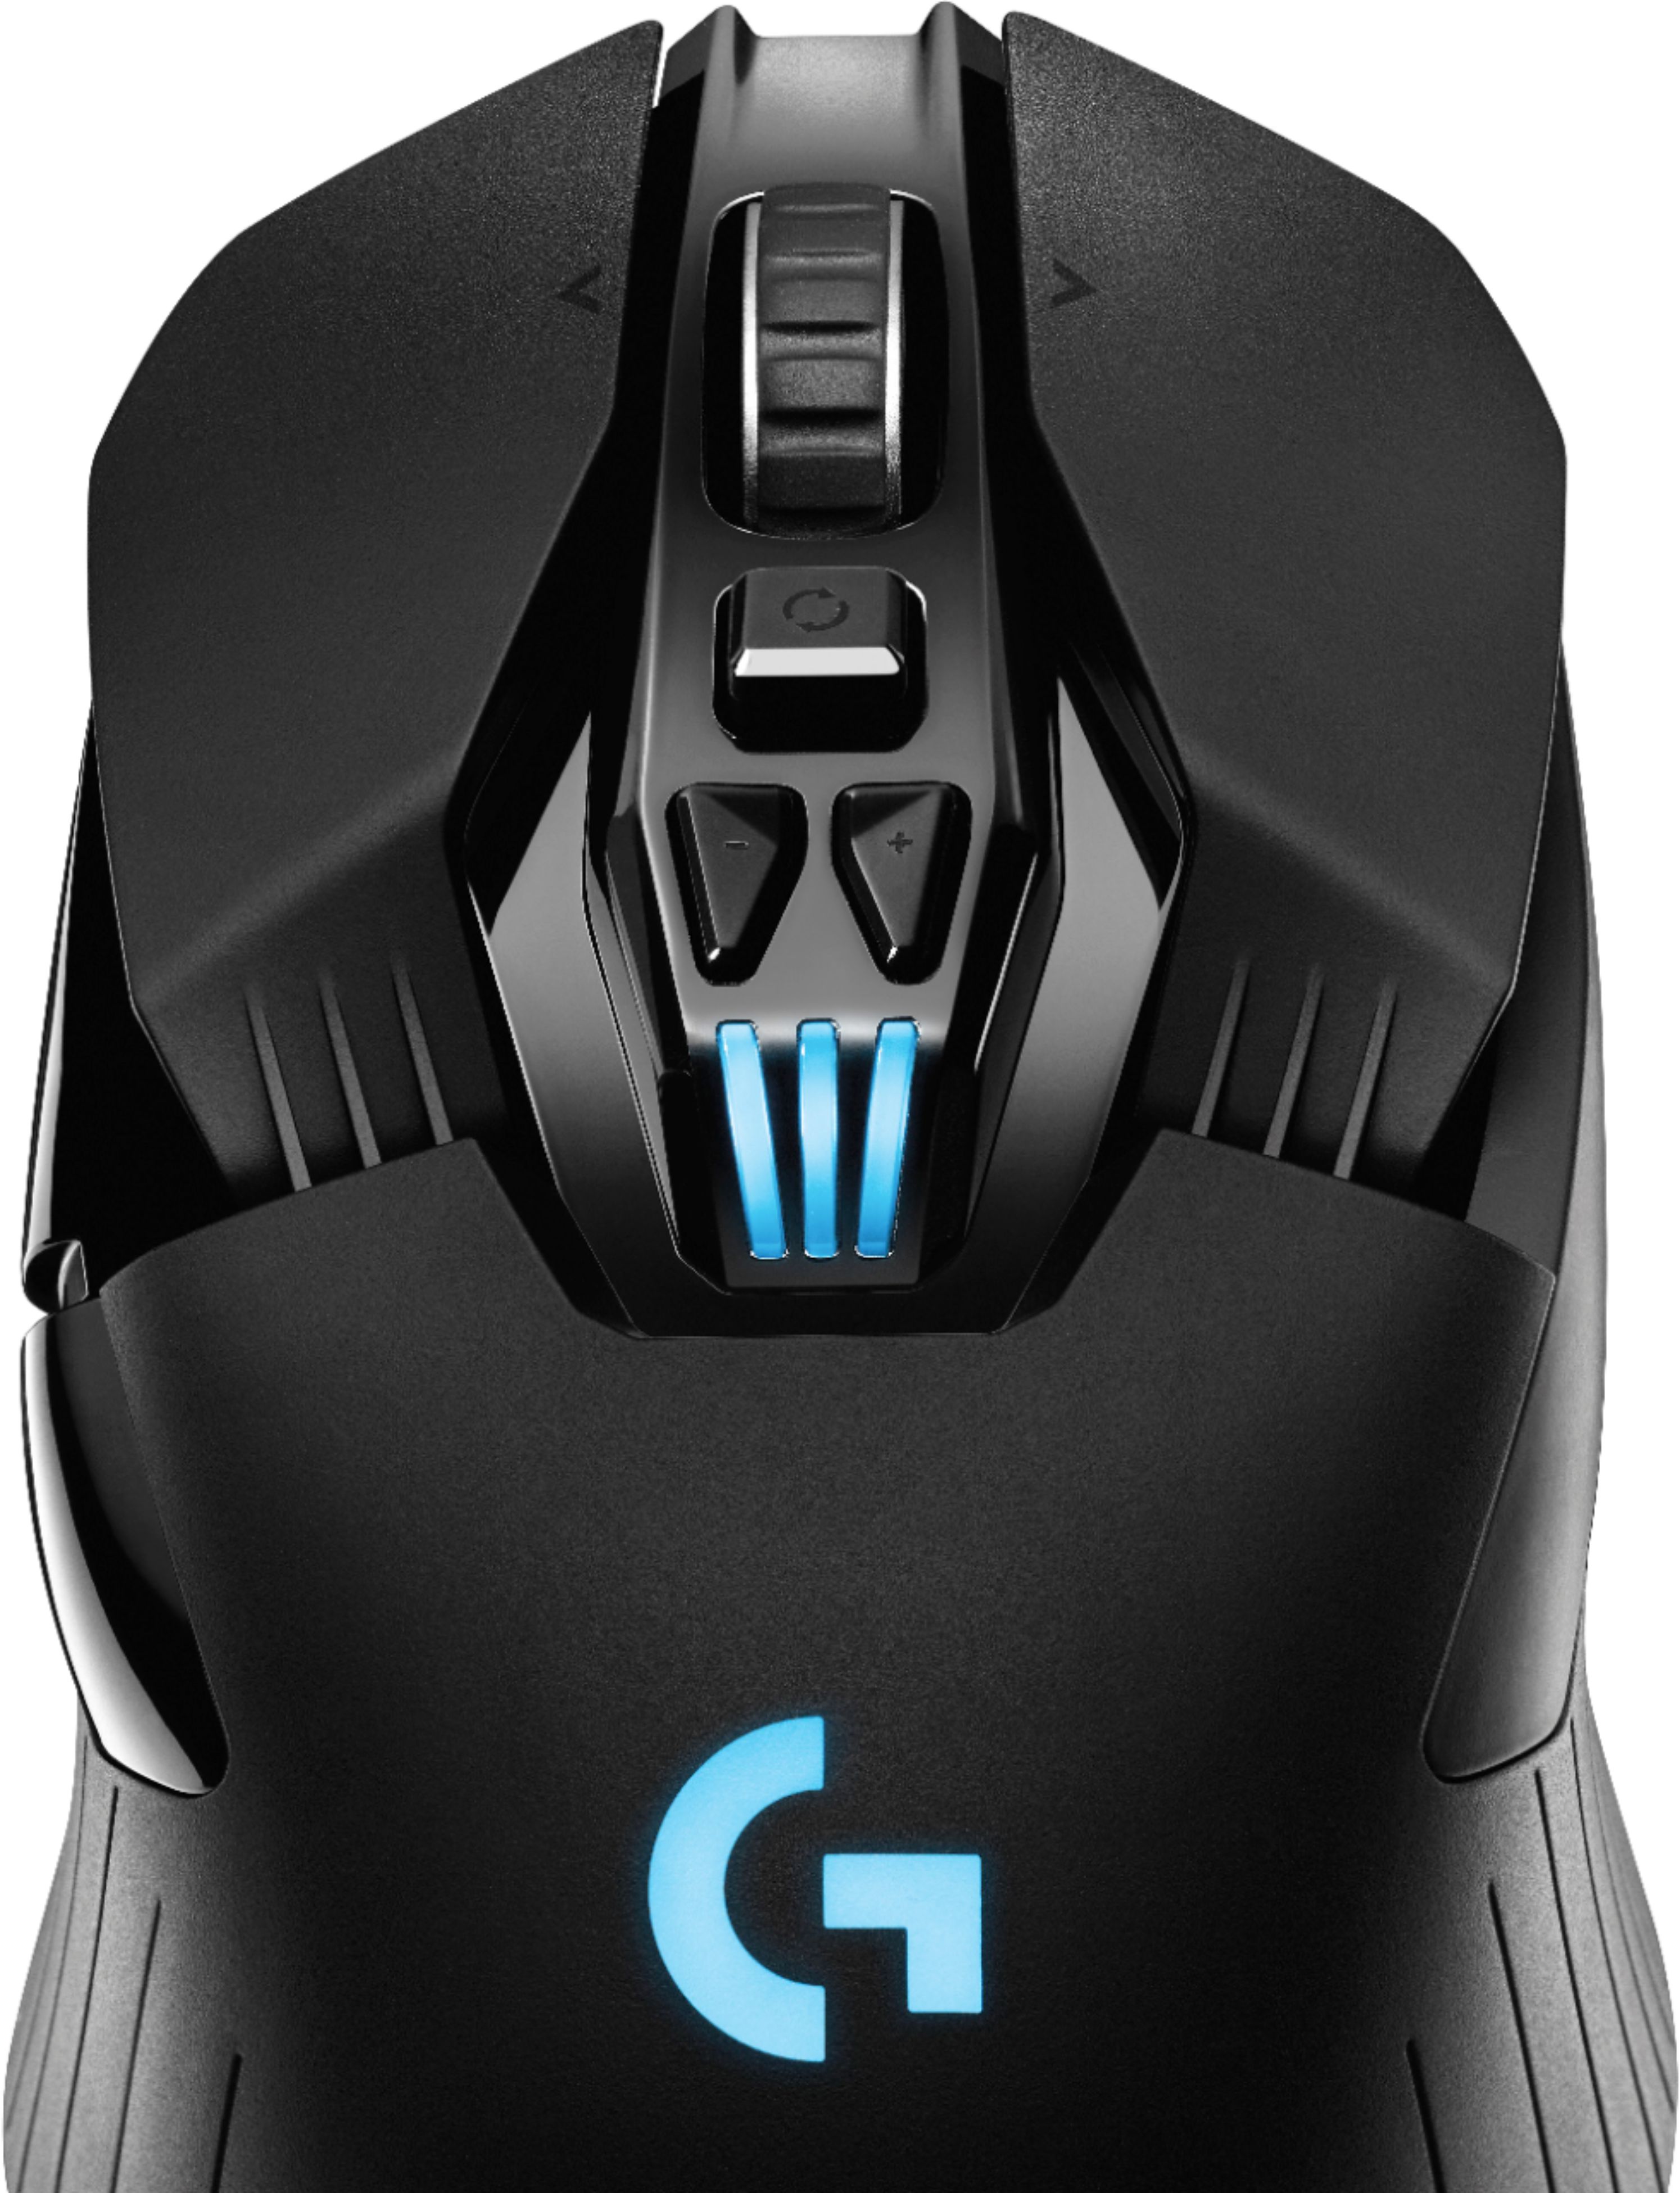 Best Buy: Logitech G903 Wireless Optical Gaming Mouse with RGB Lighting